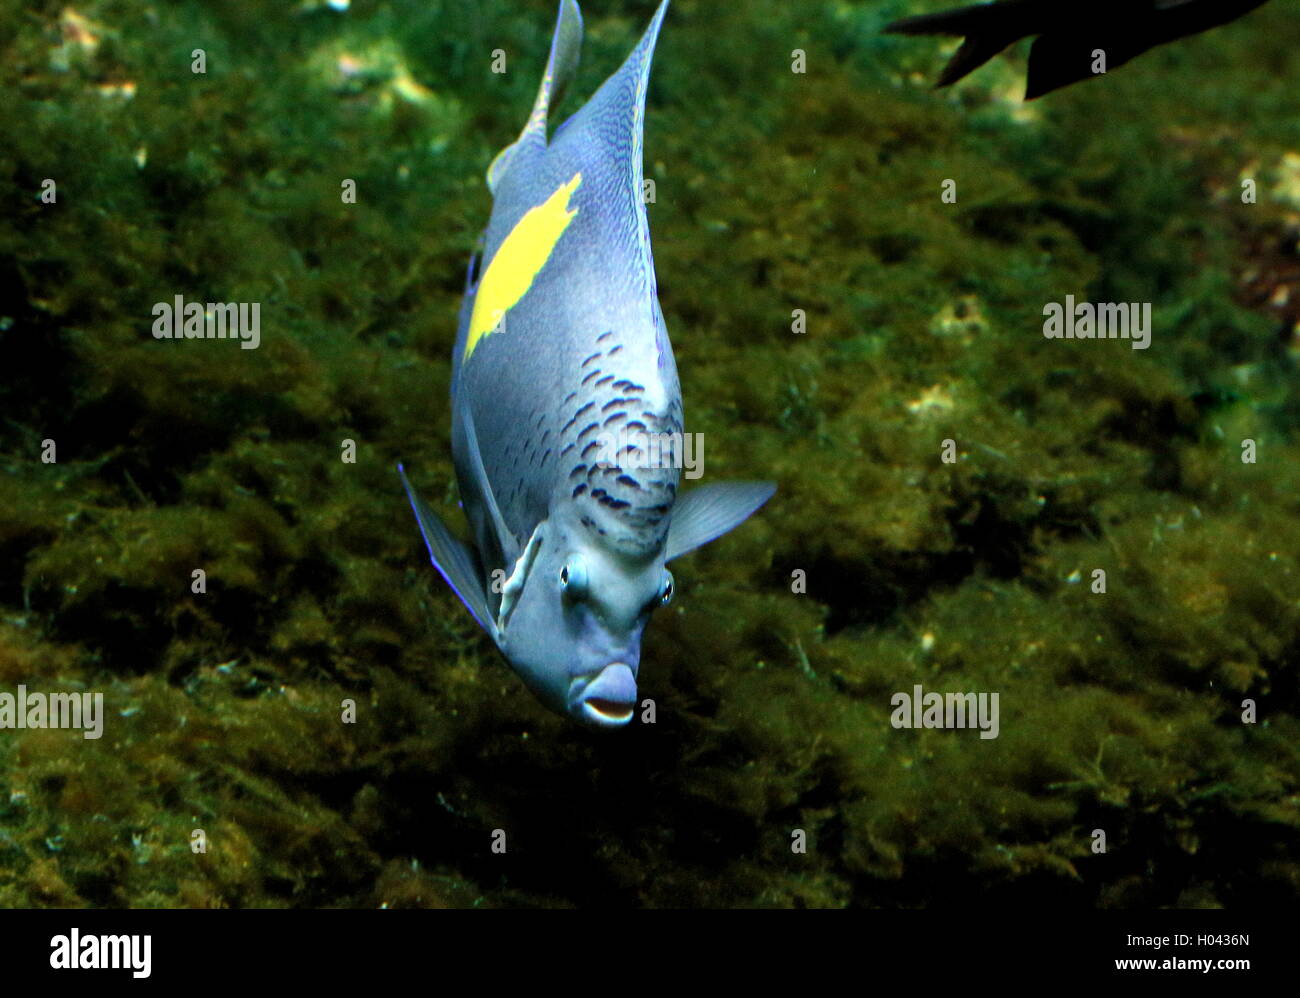 Halfmoon Angelfish (Pomacanthus maculosus), also Yellowband angelfish, native to the Persian Gulf and Indian Ocean Stock Photo